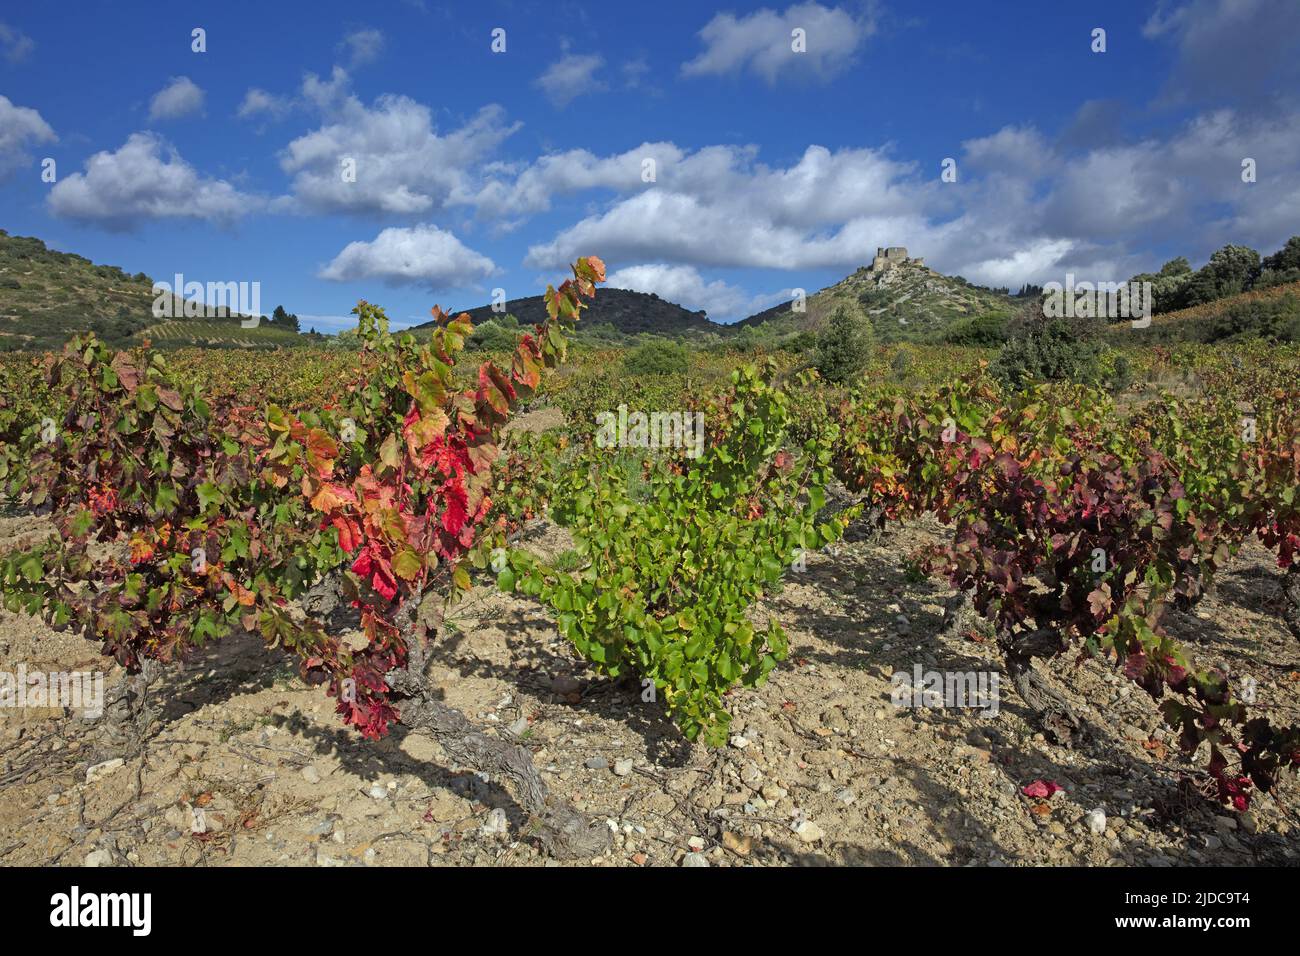 France, Aude Tuchan, the castle of Aguilar from the vineyard Stock Photo